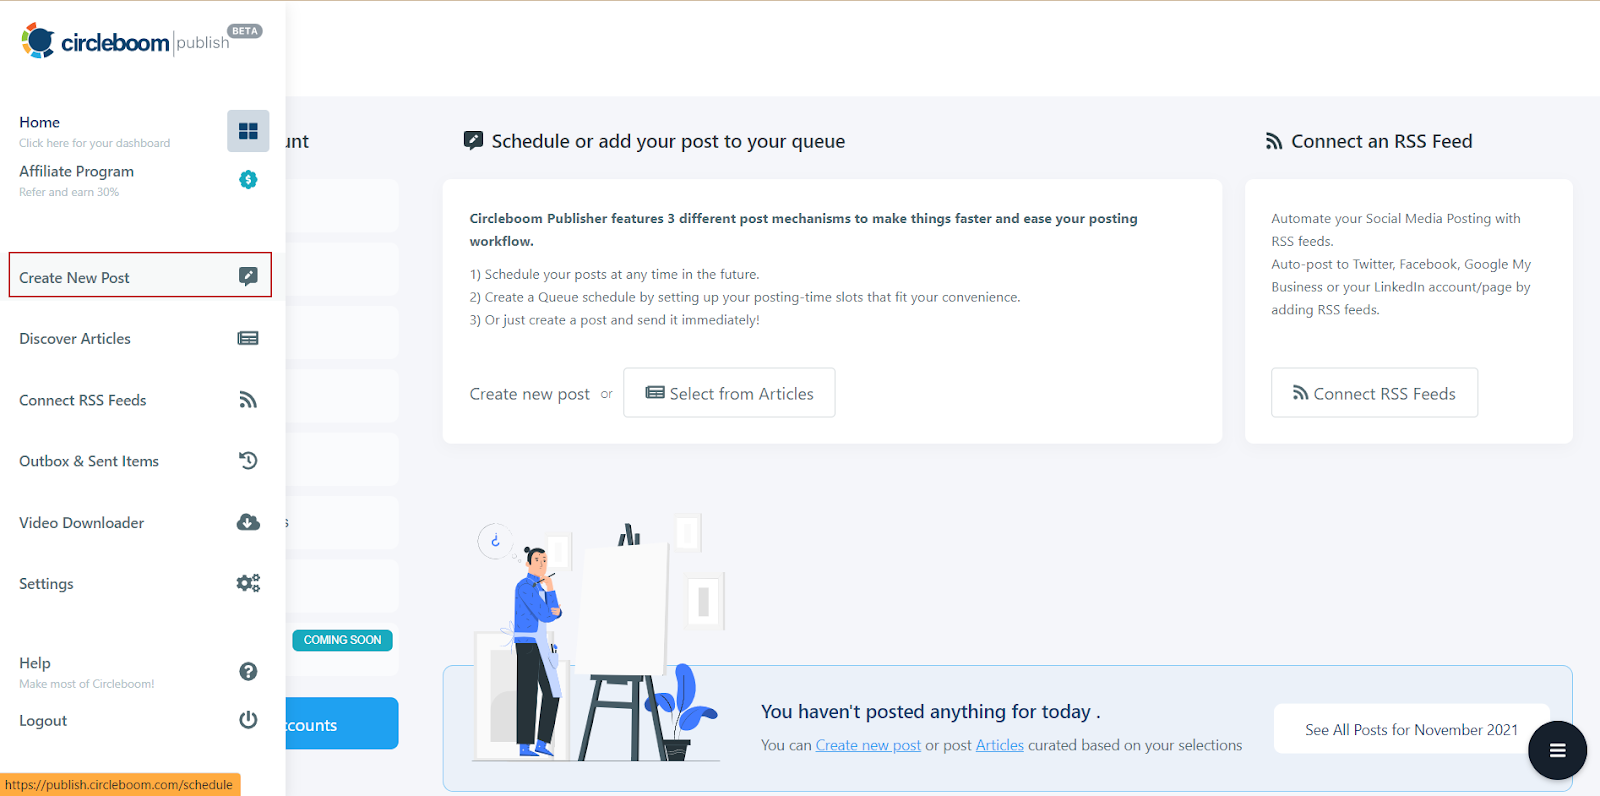 You can create new posts on Circleboom Publish.